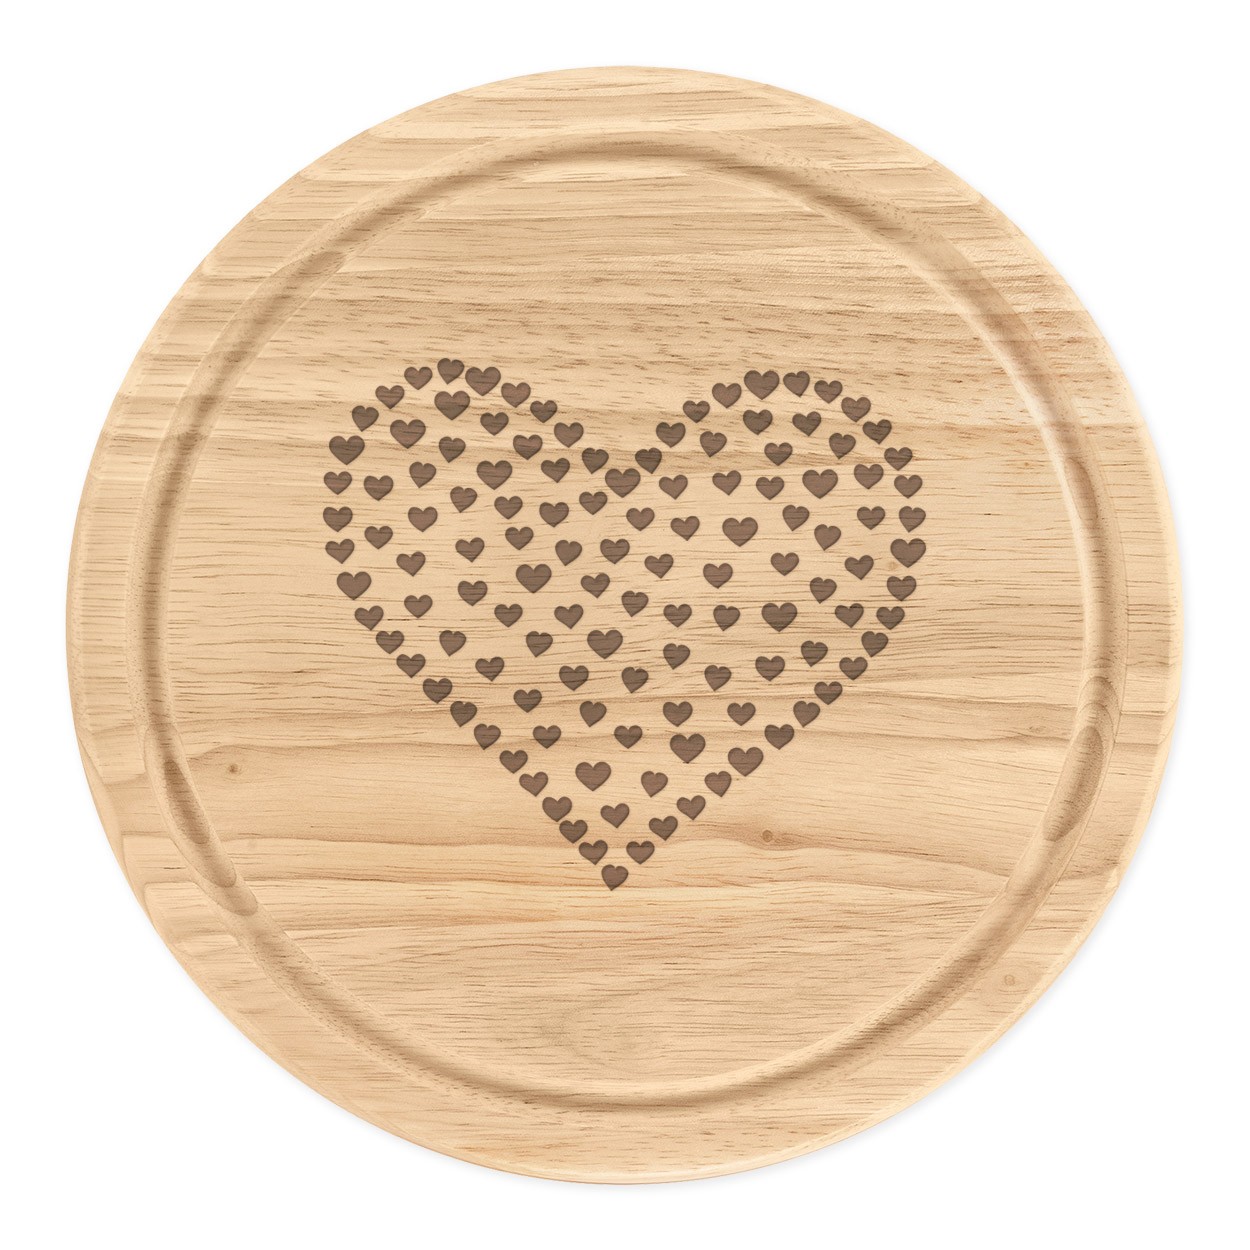 Heart Of Hearts Wooden Chopping Cheese Board Round 25cm